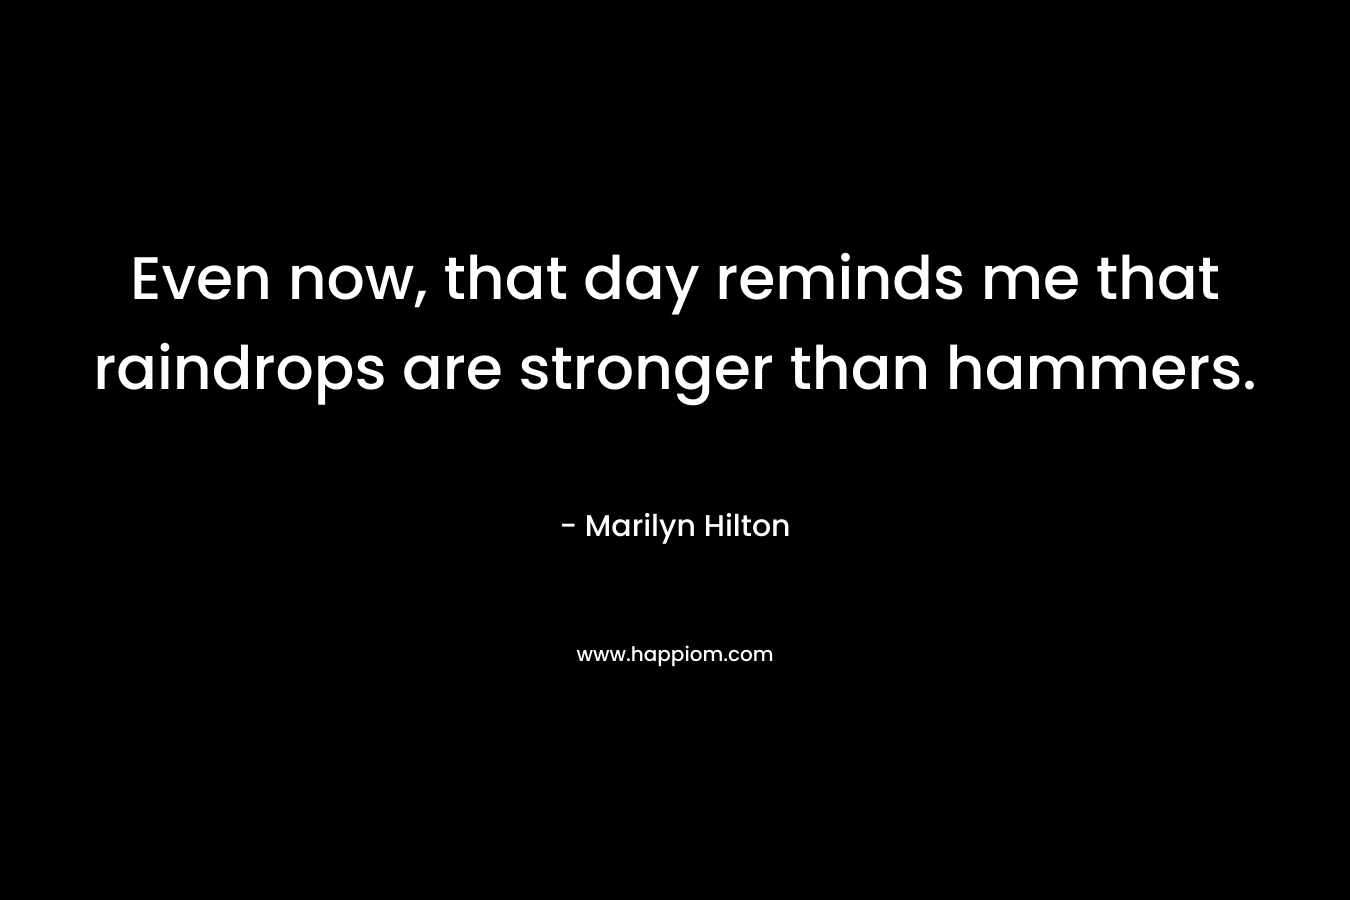 Even now, that day reminds me that raindrops are stronger than hammers. – Marilyn Hilton